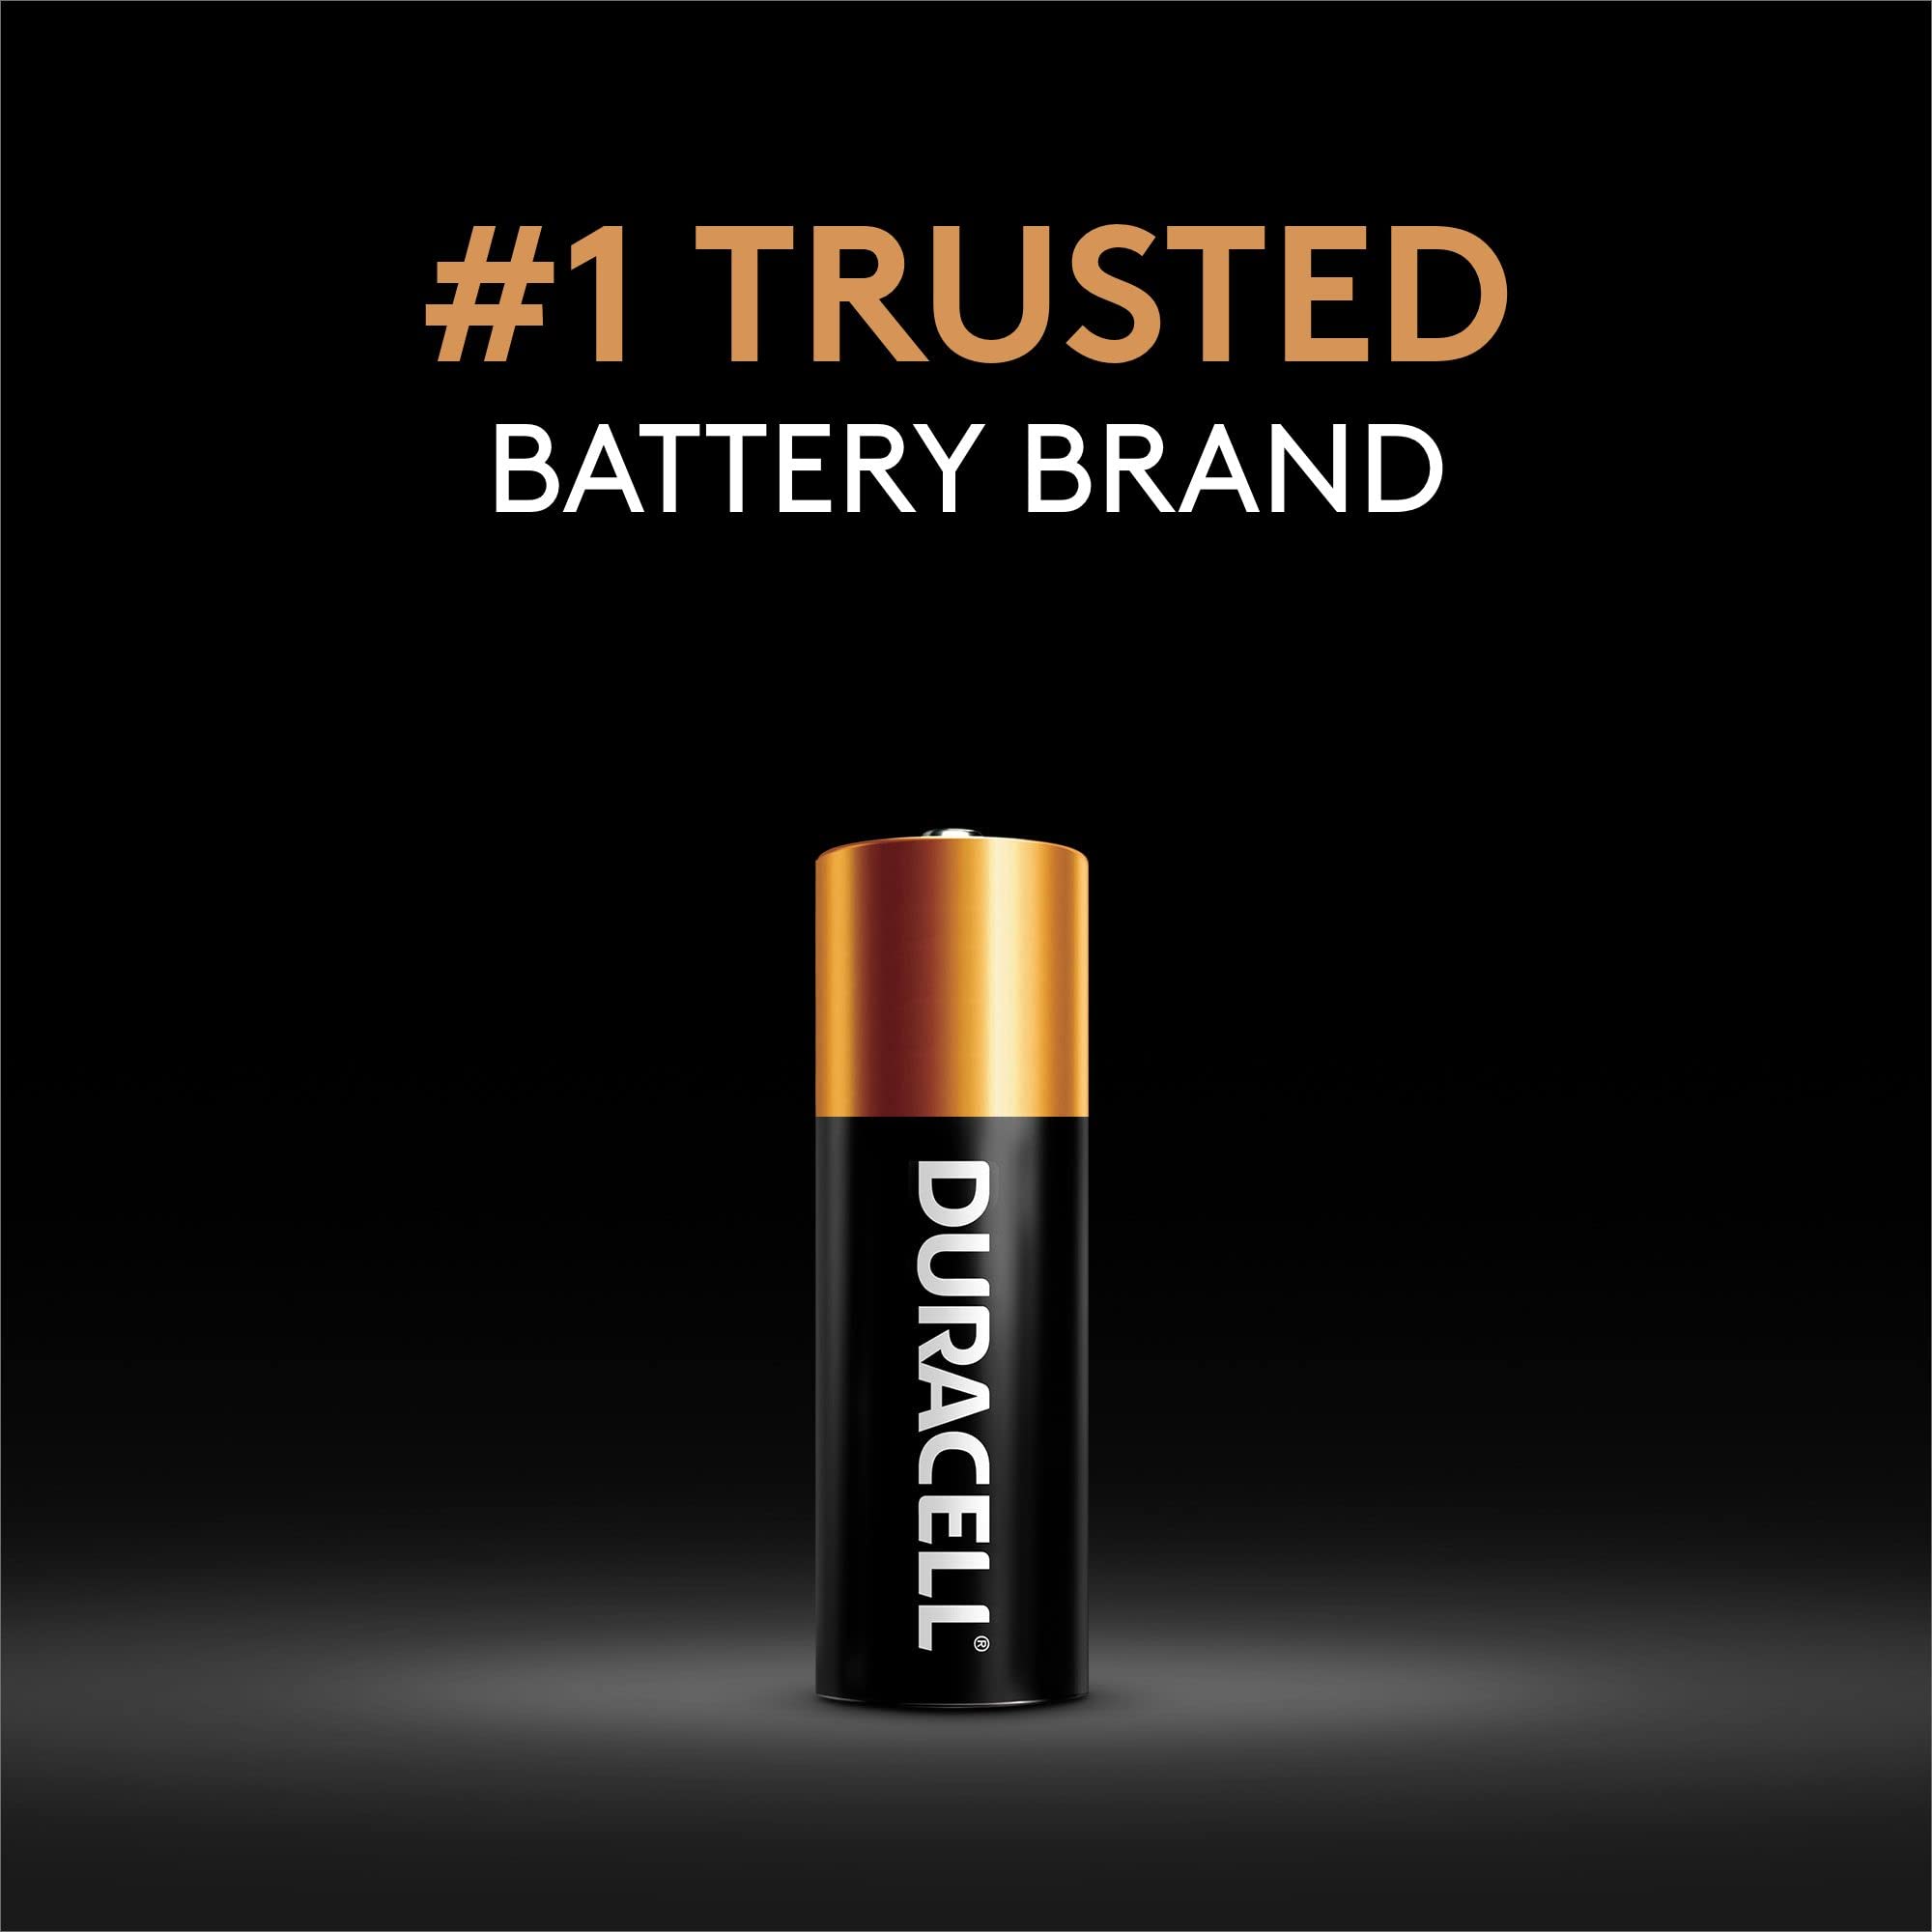 Duracell 21/23 12V Alkaline Battery, 2 Count Pack, 21/23 12 Volt Alkaline Battery, Long-Lasting for Key Fobs, Car Alarms, GPS Trackers, and More